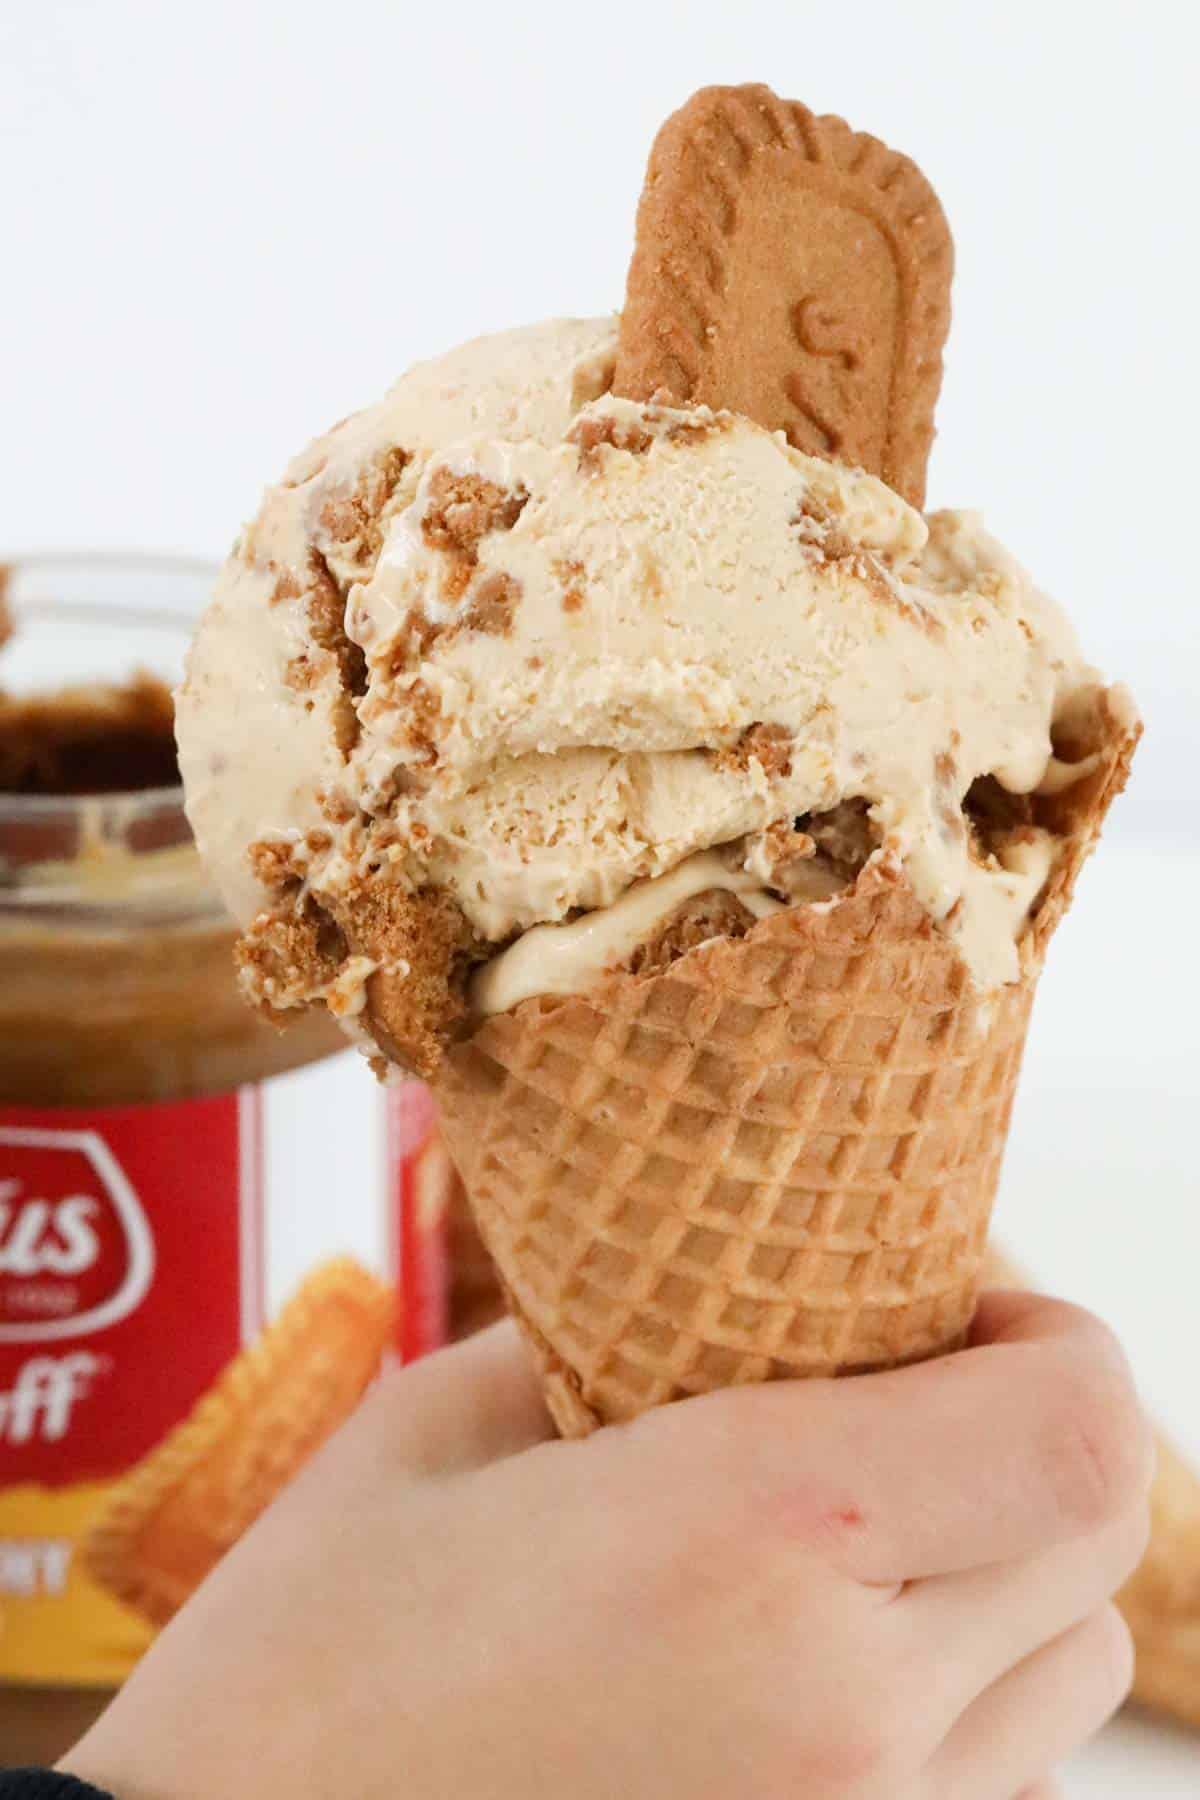 A waffle cone being held, with a Lotus biscuit placed in the ice cream.